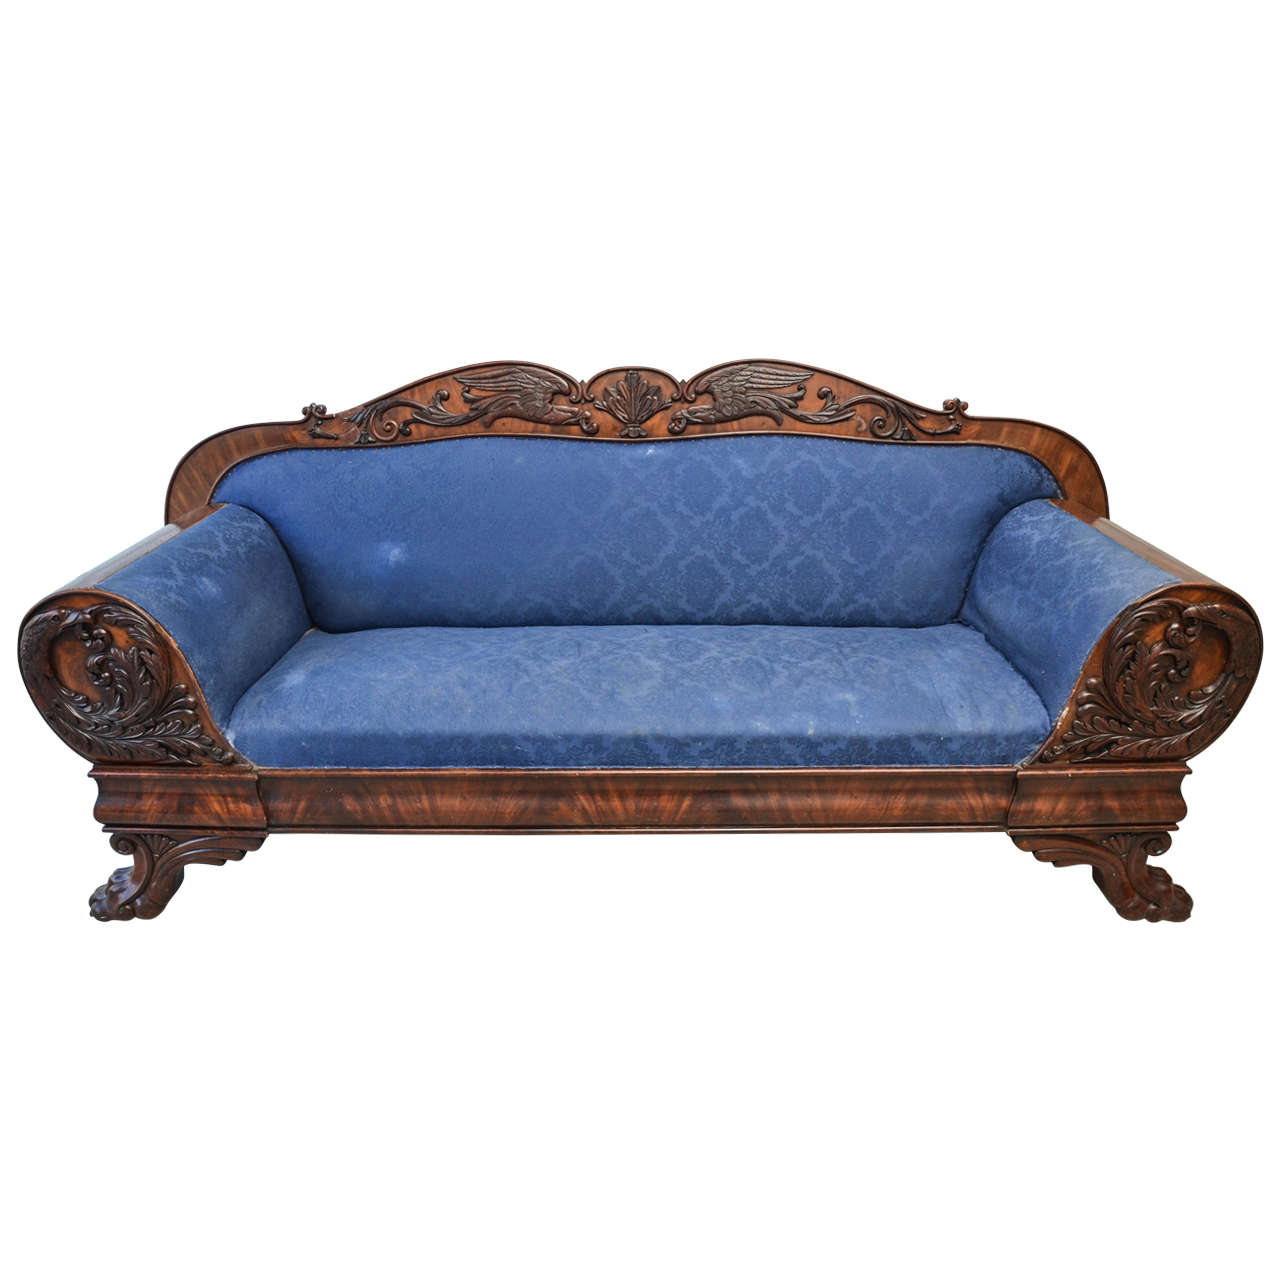 Neoclassical Style Claw Foot and Eagle Appliqué Sofa